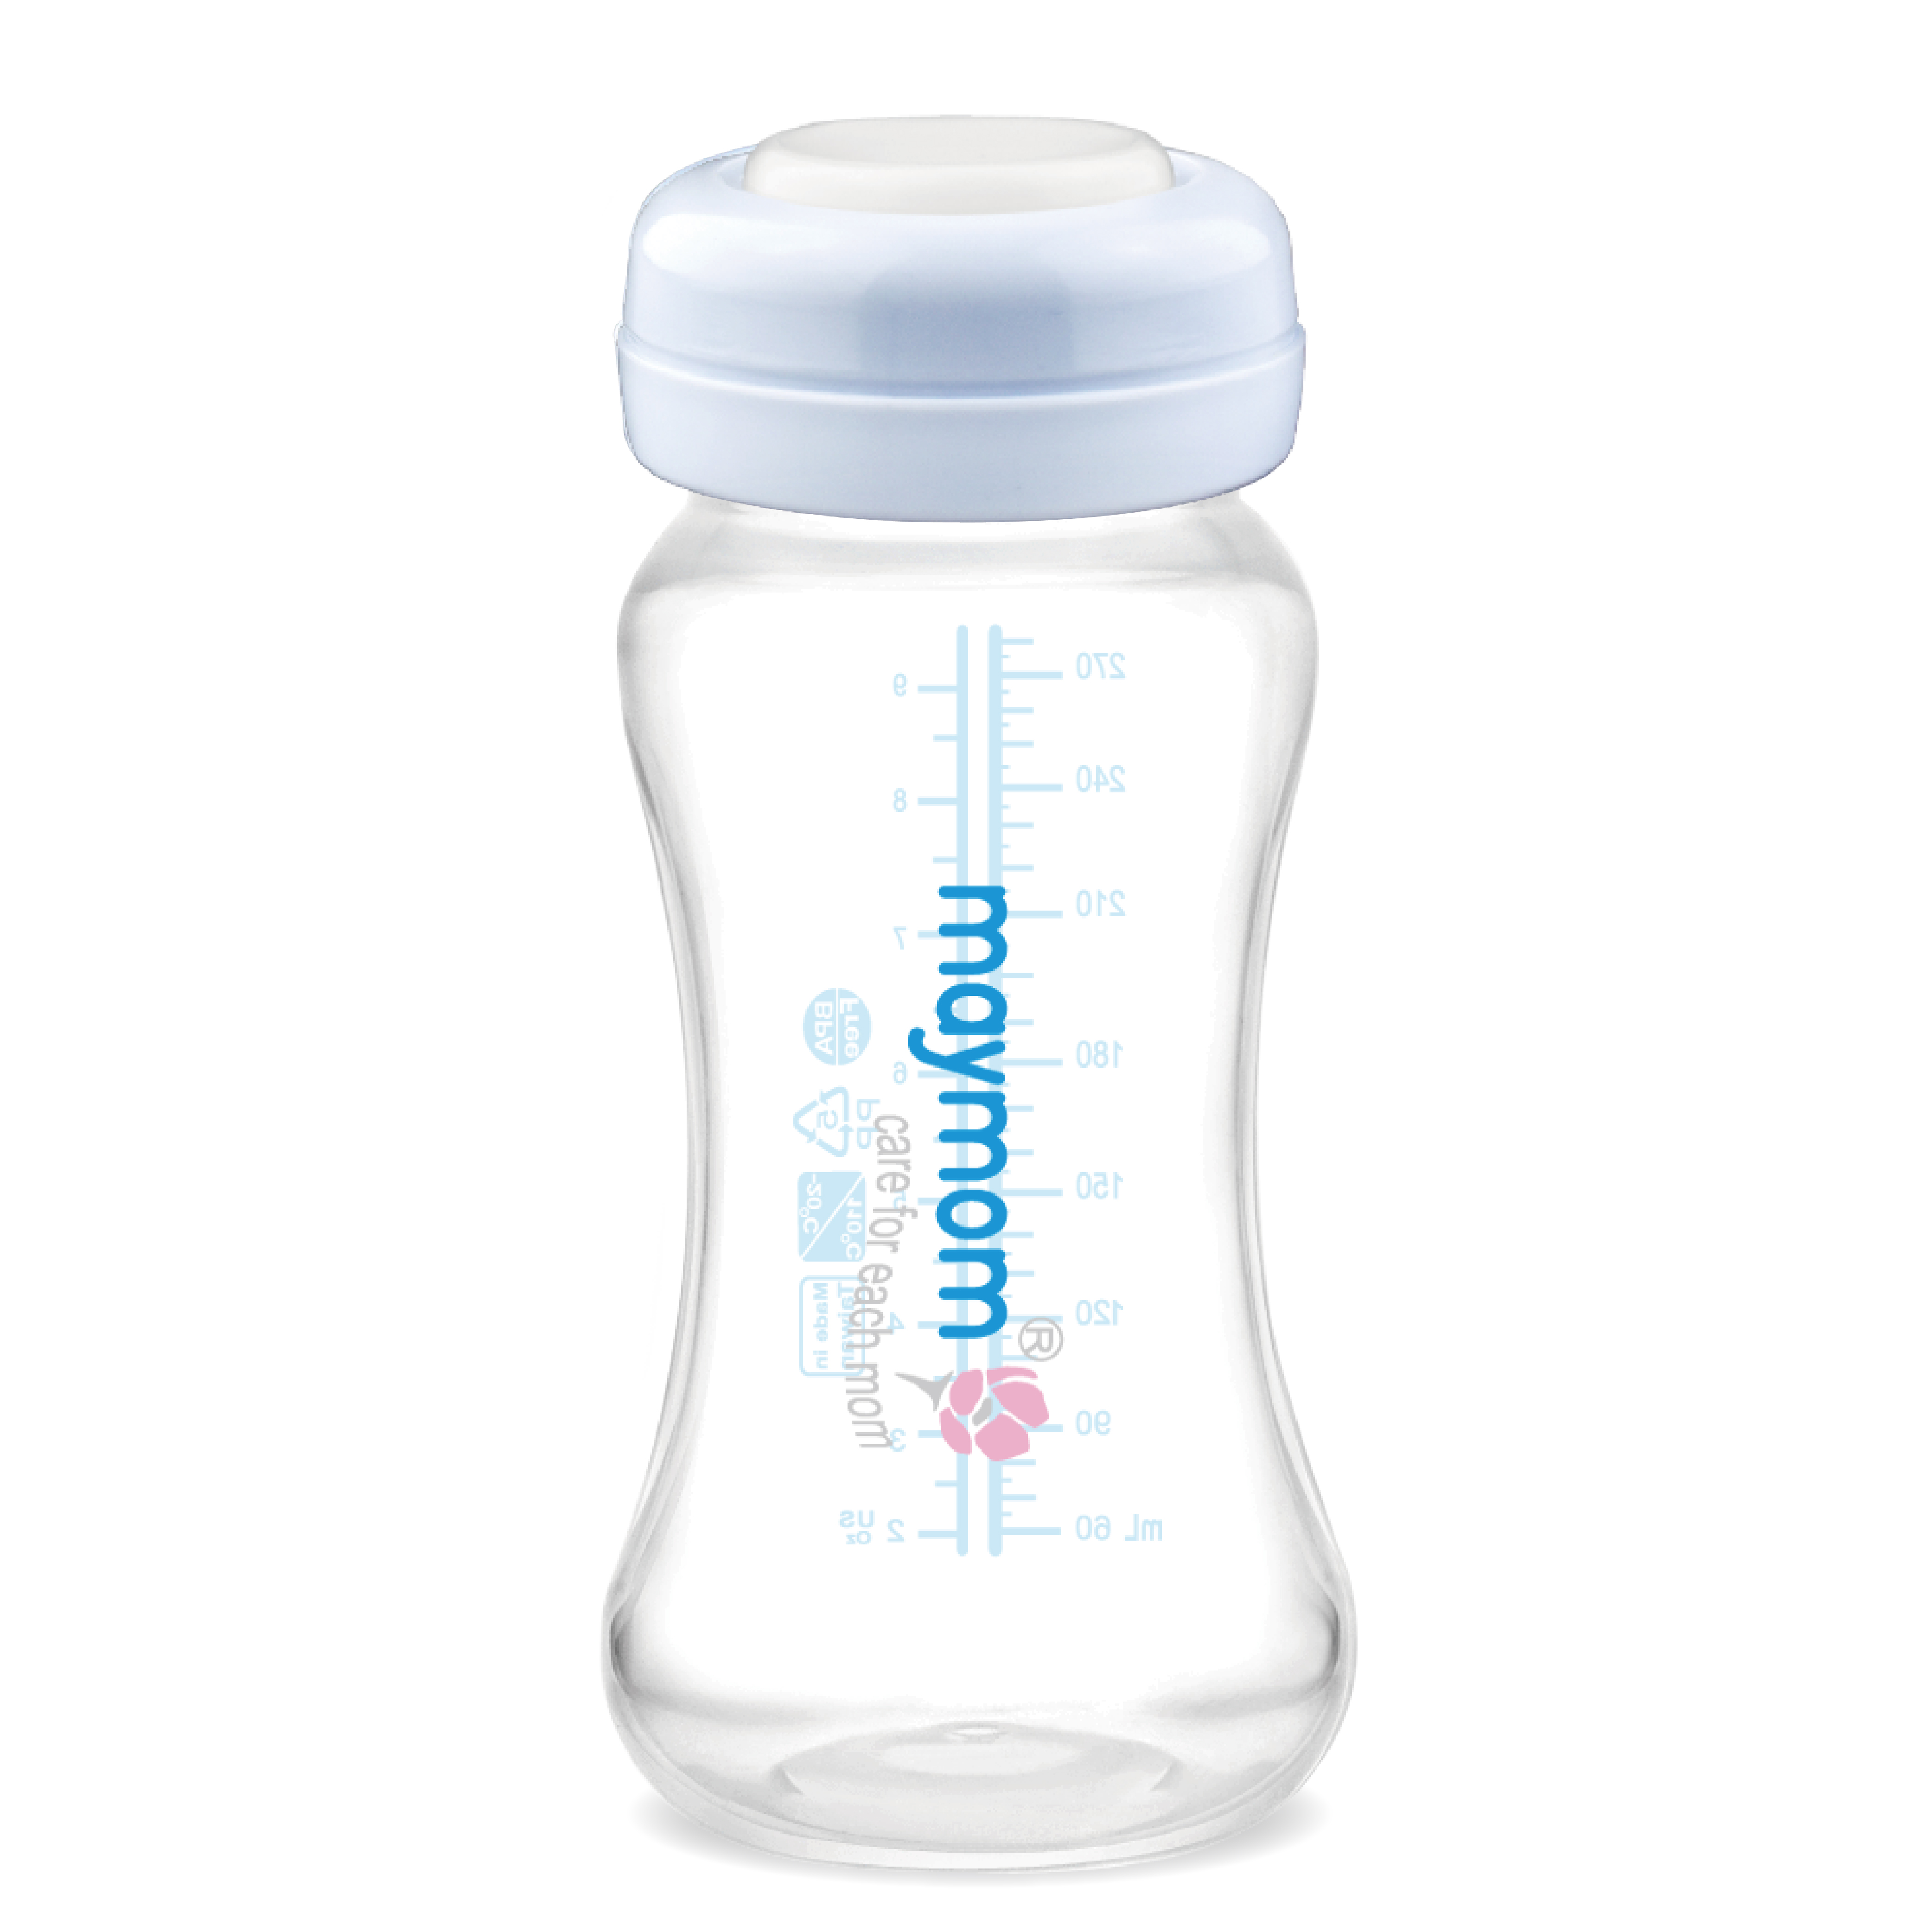 Maymom wide-mouth bottle for Avent/Spectra flange with SureSeal silicone disk, 280mL